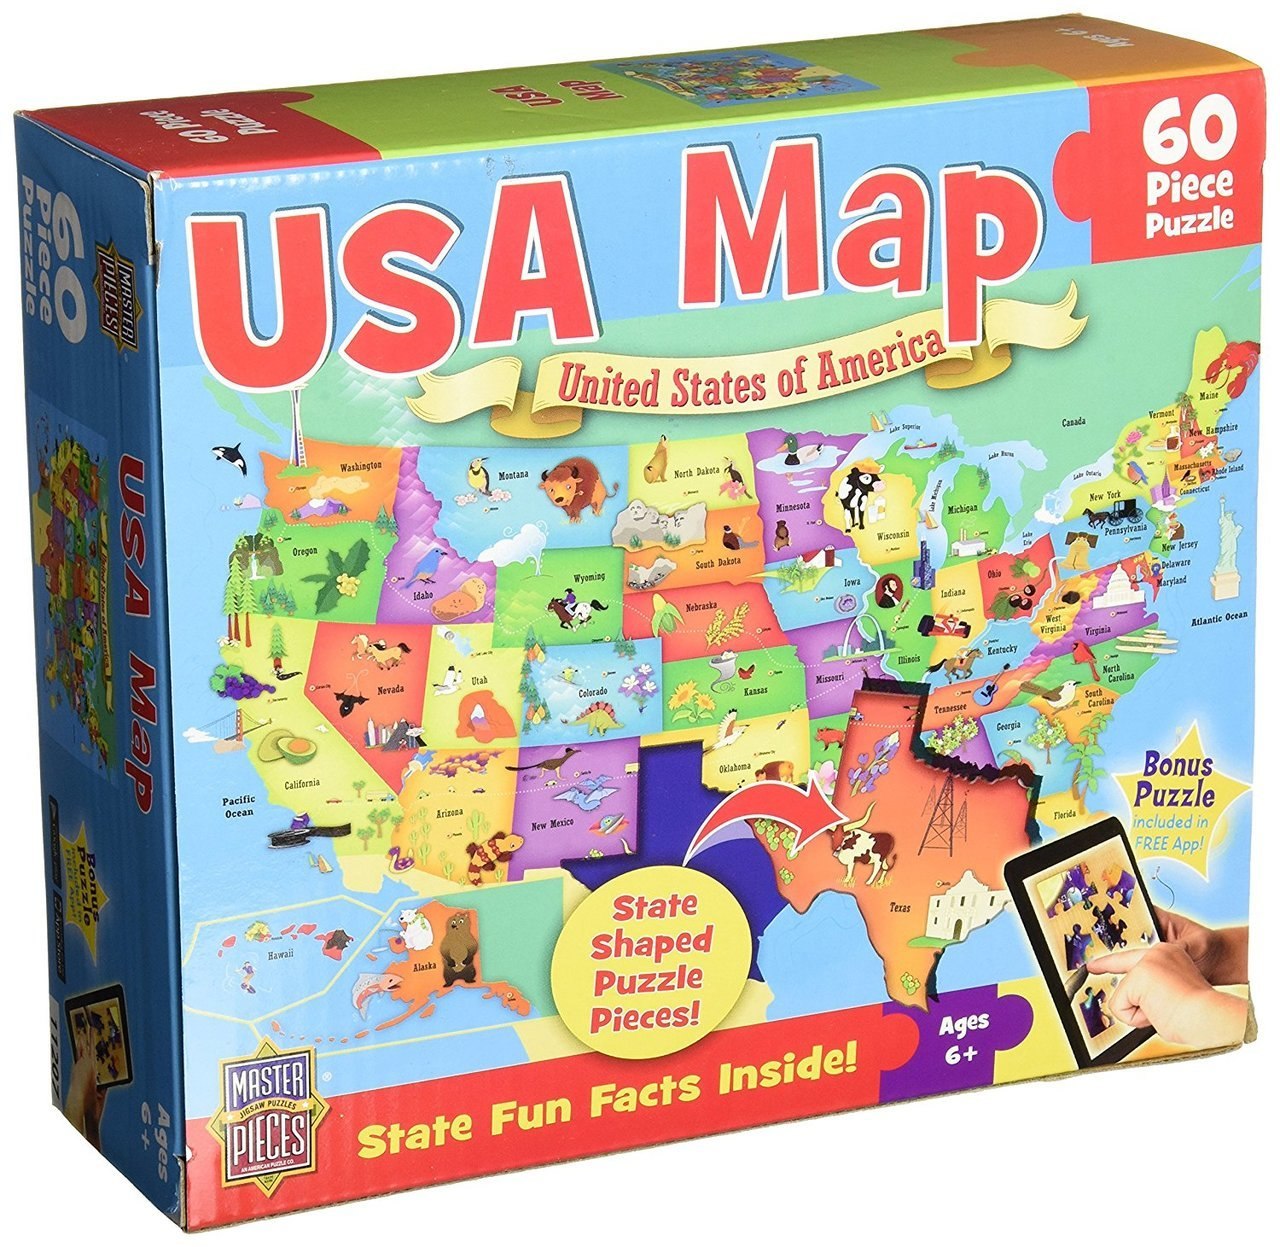 USA Wood Map - 44pc Jigsaw Puzzle By Masterpieces - image 1